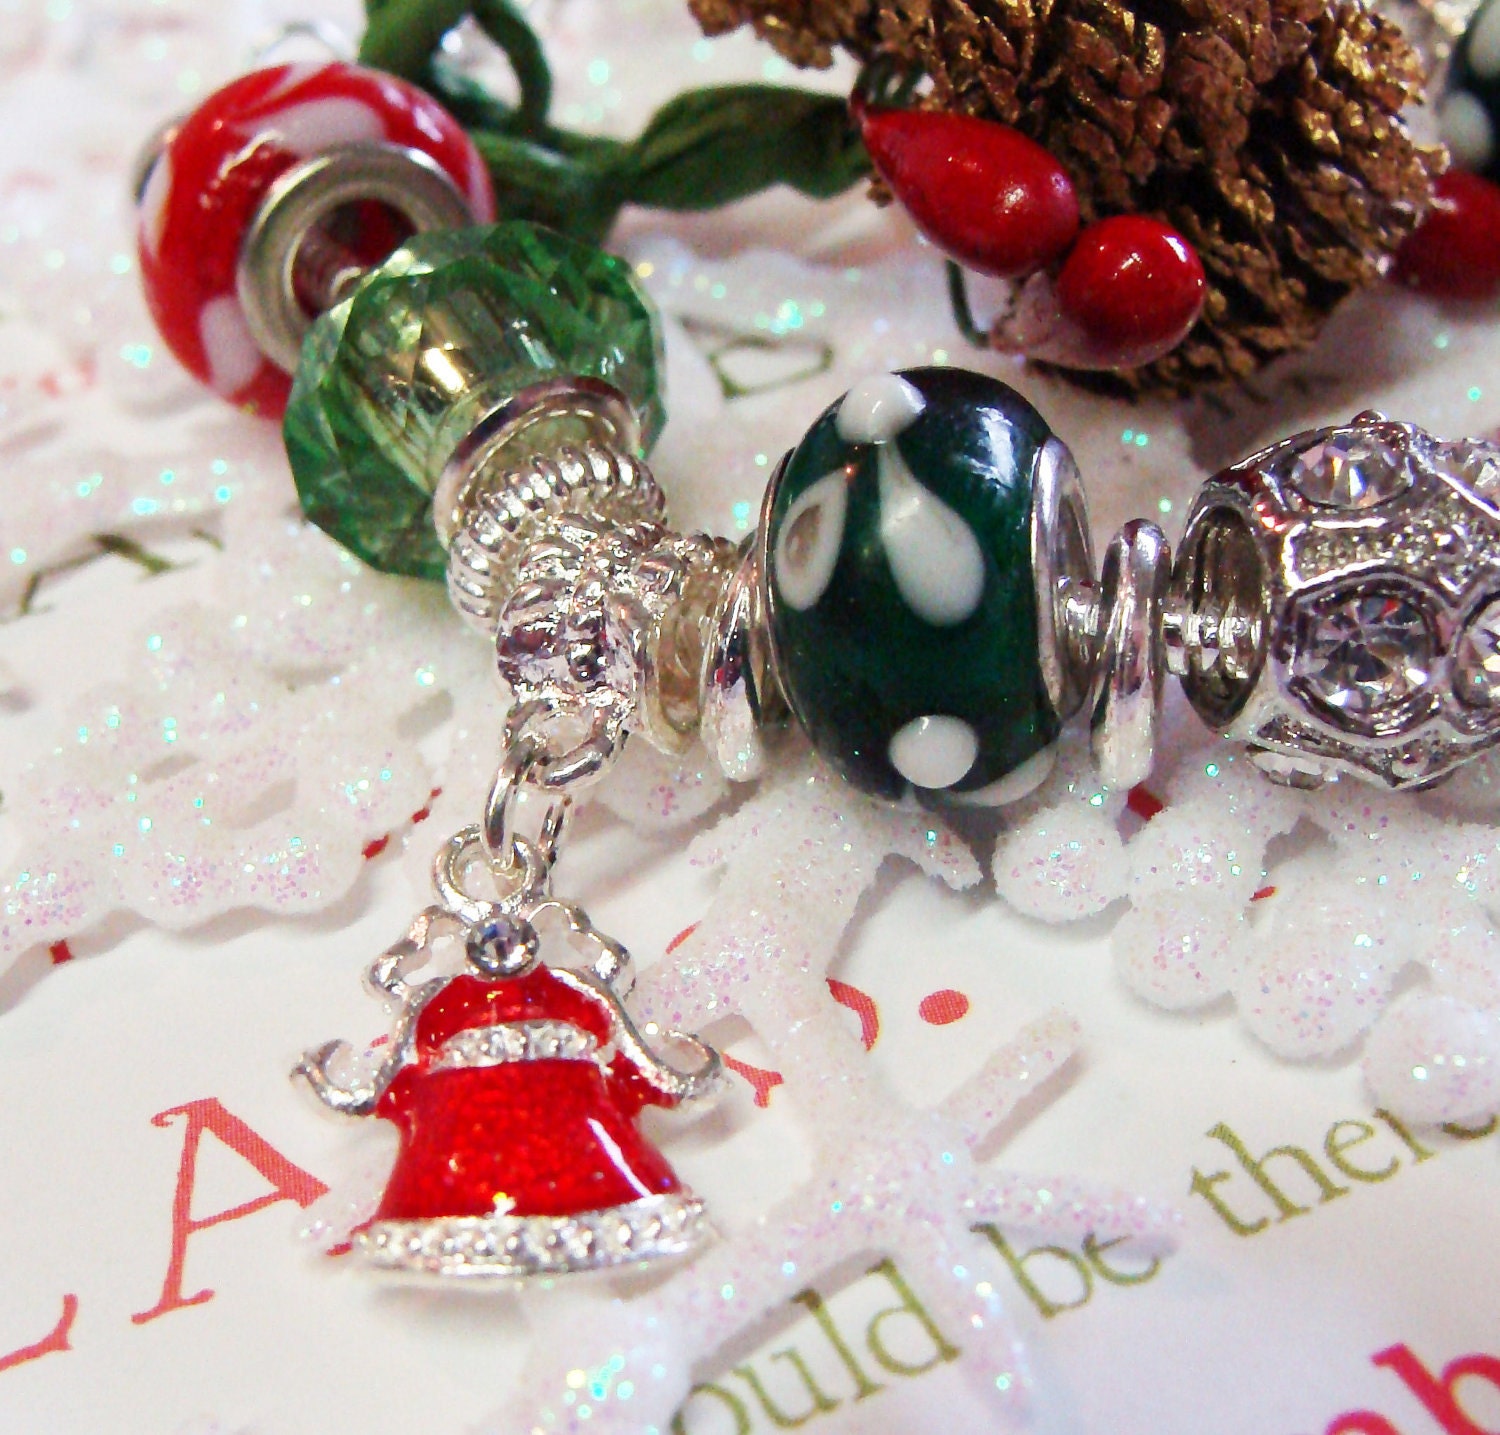 Christmas Red and Green Pandora Style Bracelet with Faceted Crystals and Rhinestones